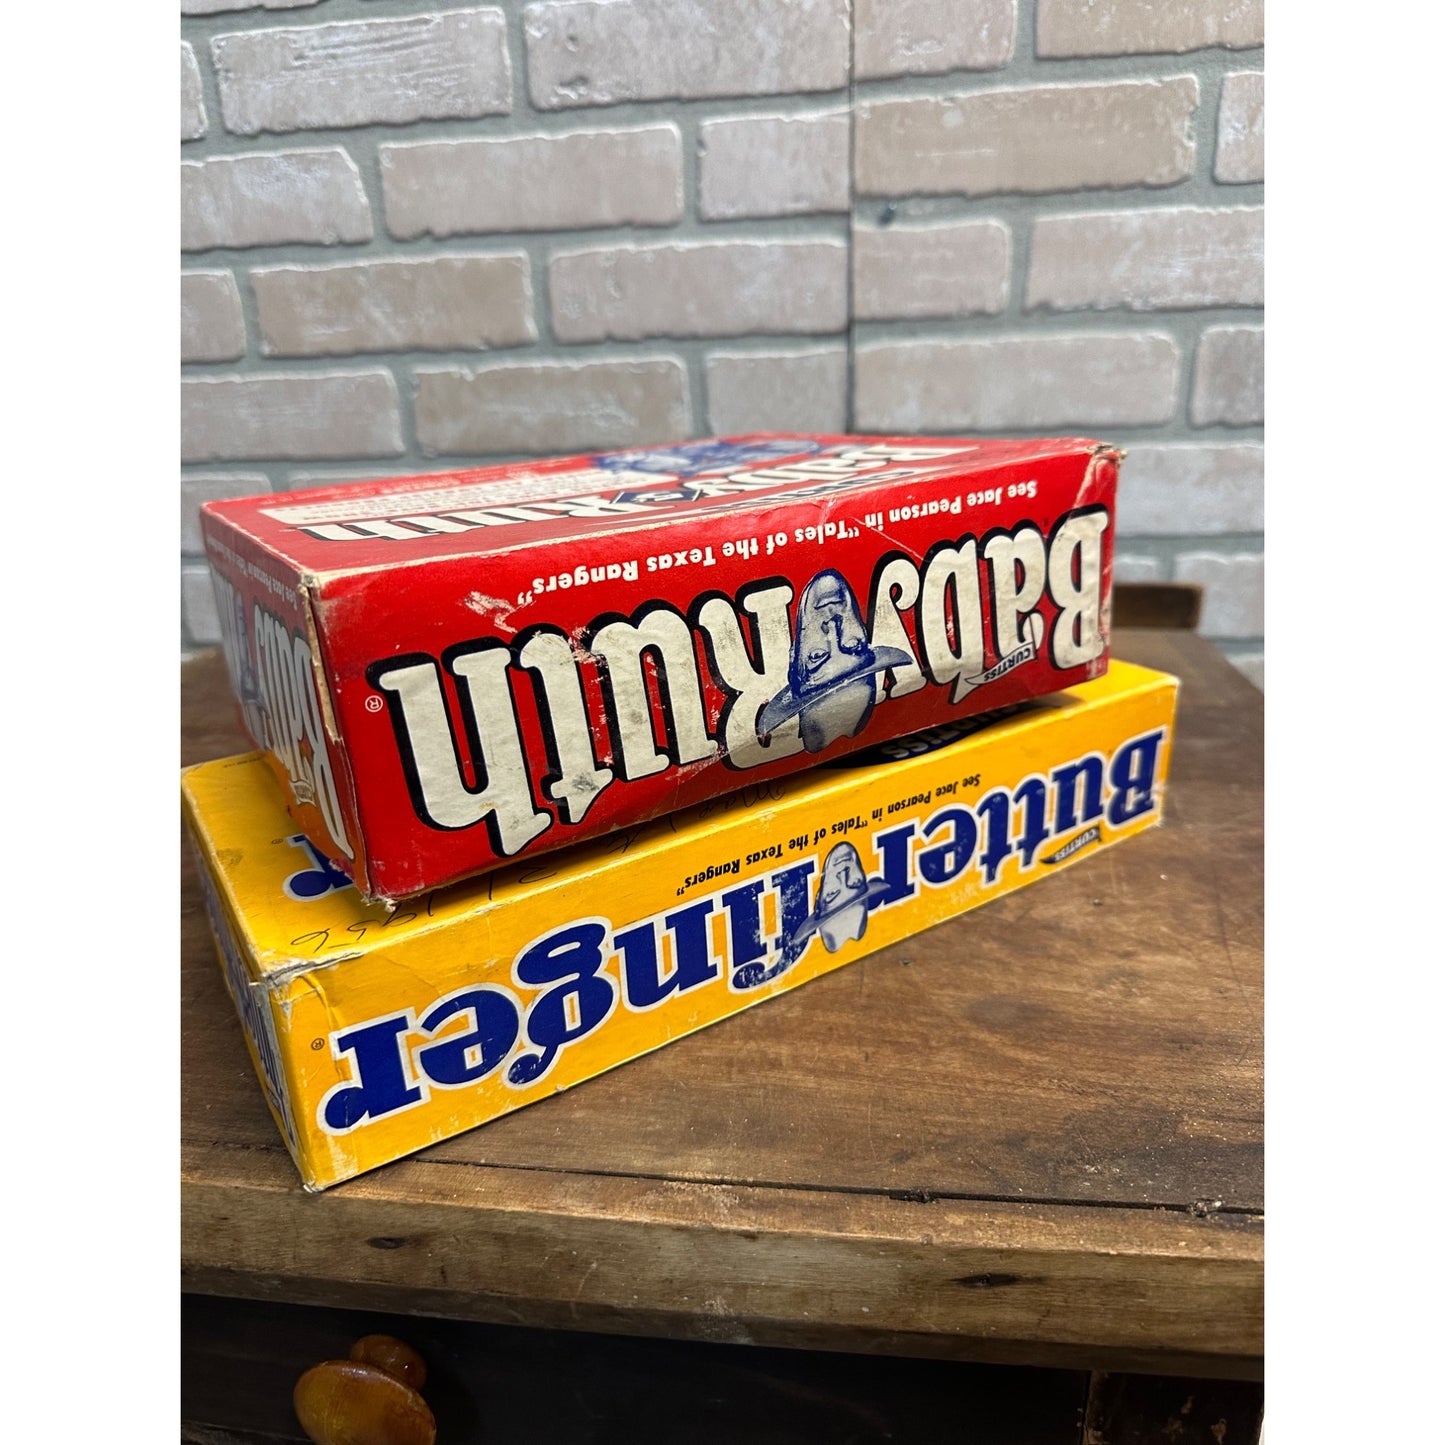 Vintage 1950s Curtiss Baby Ruth & Butterfinger Candy Boxes TV Show Texas Rangers